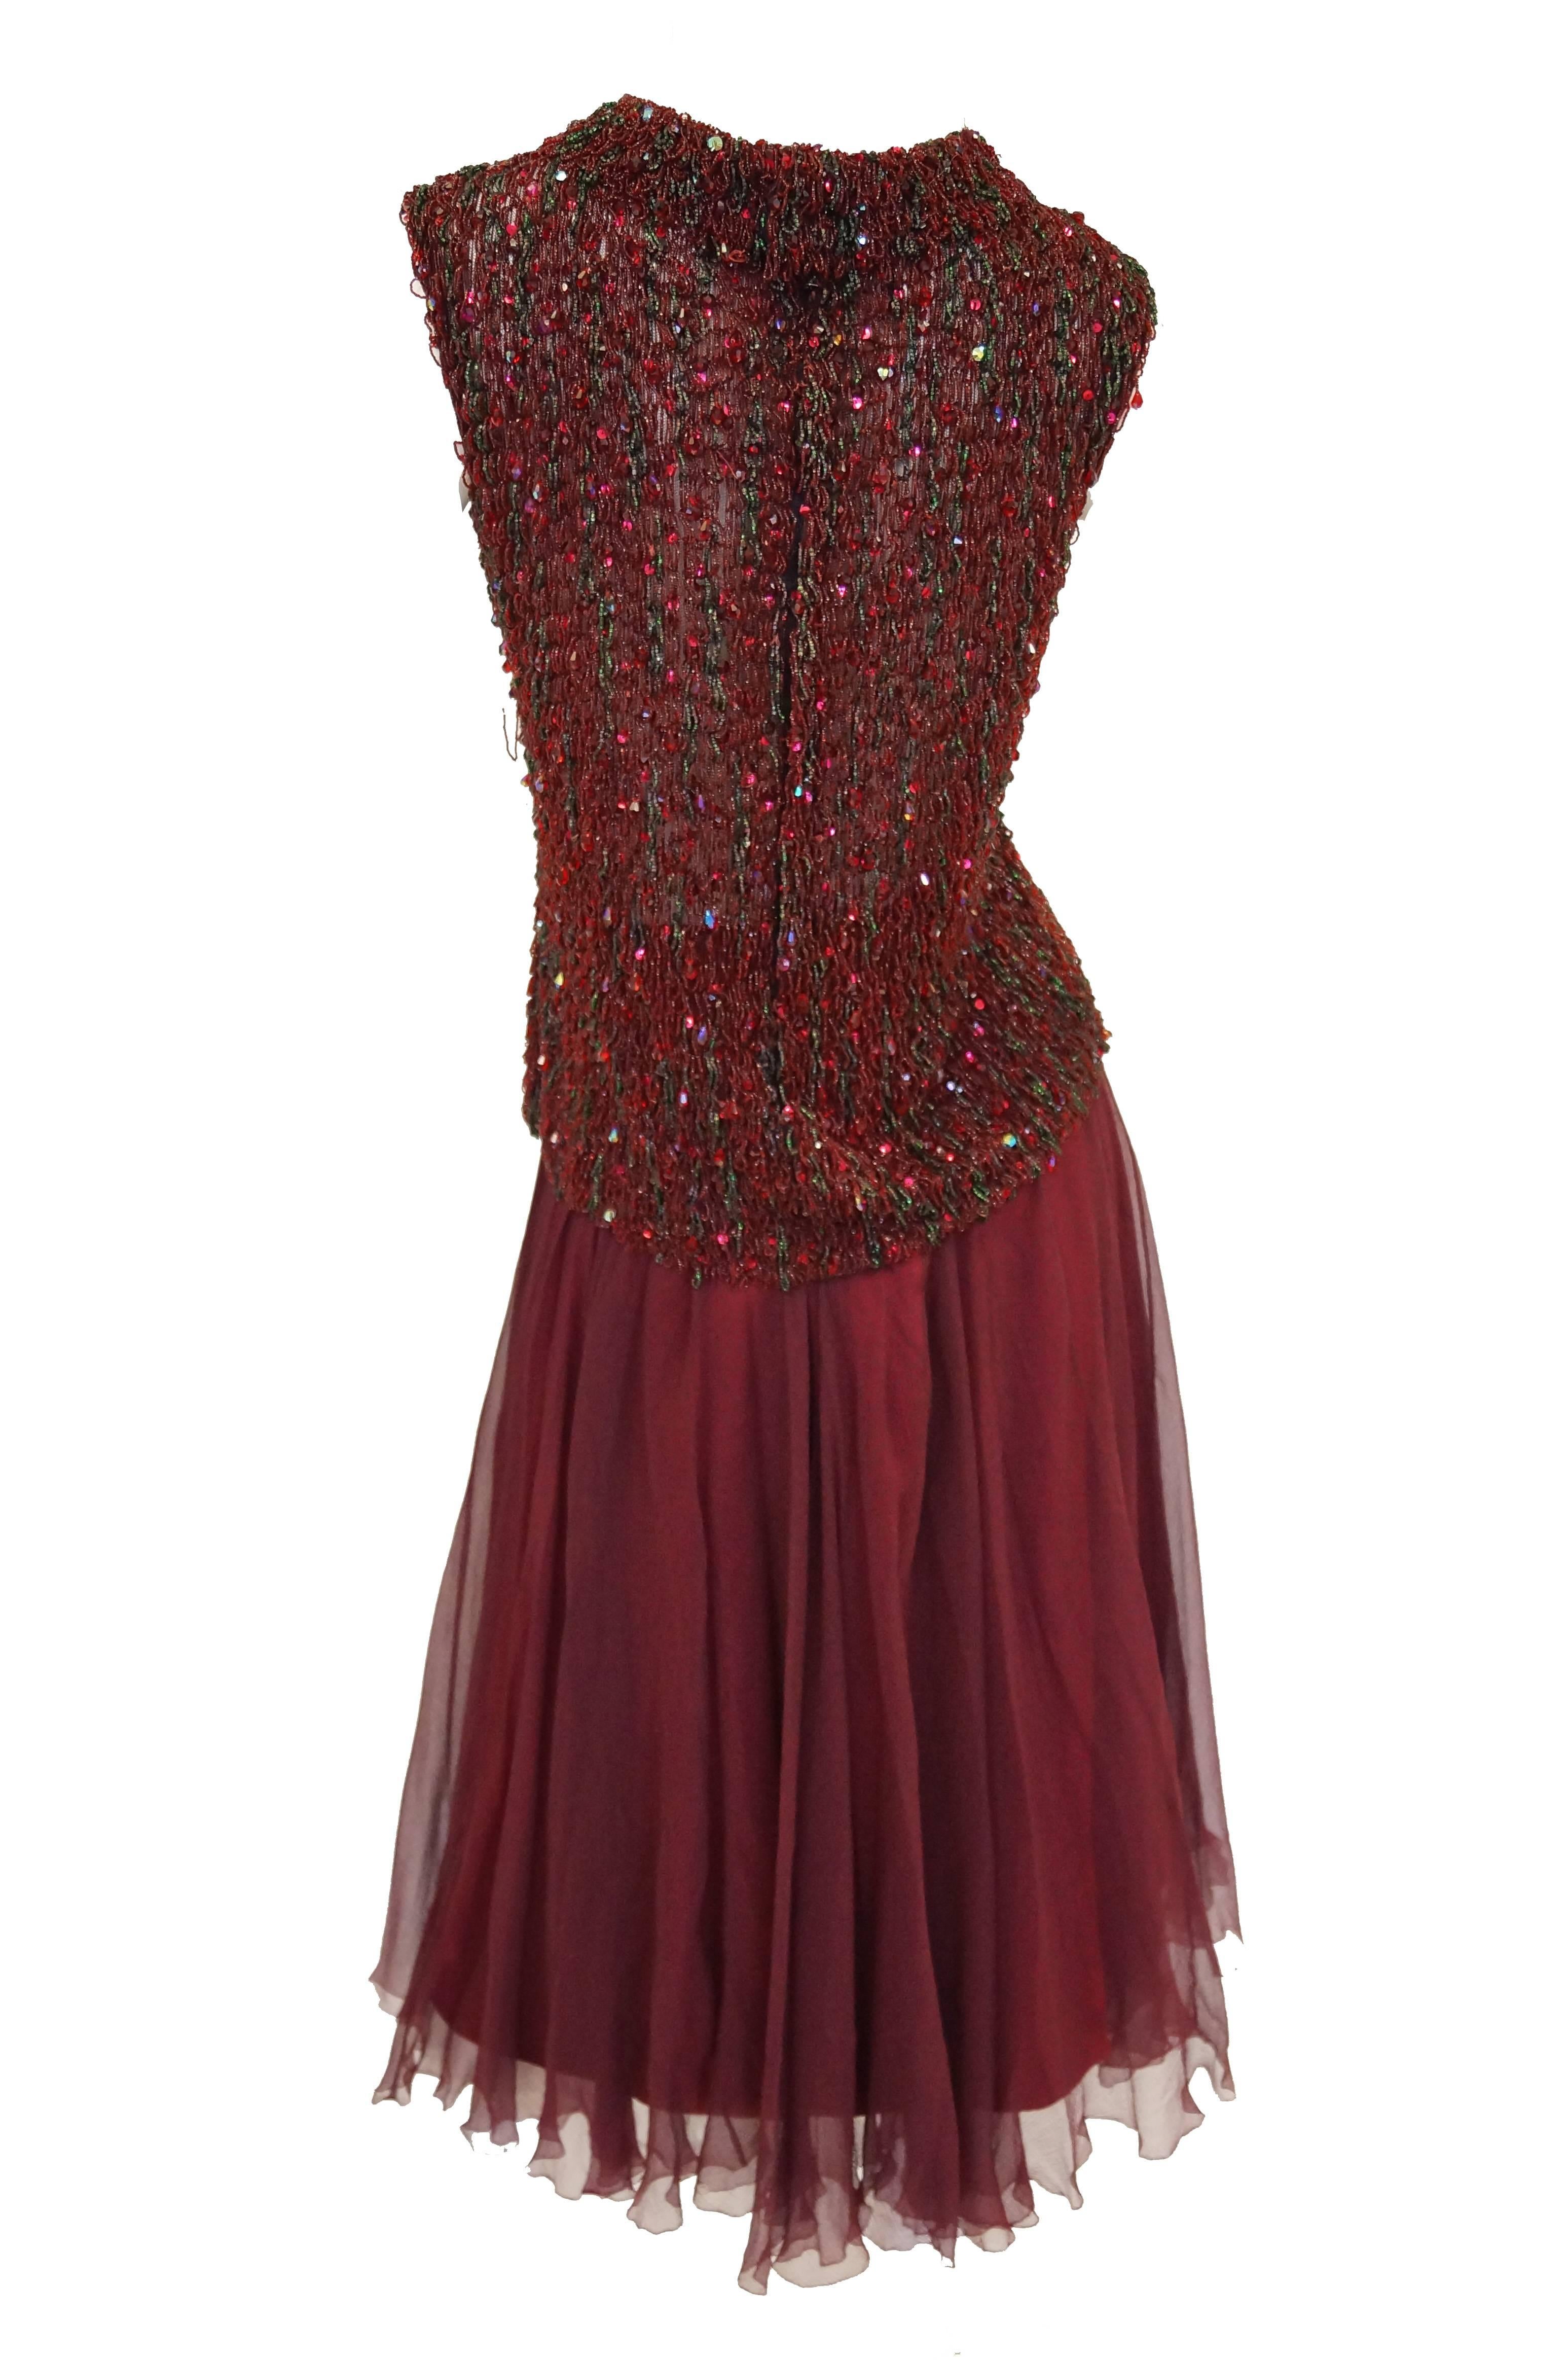 Women's Yves Saint Laurent Couture Evening Dress Owned by Claudette Colbert, 1963  For Sale